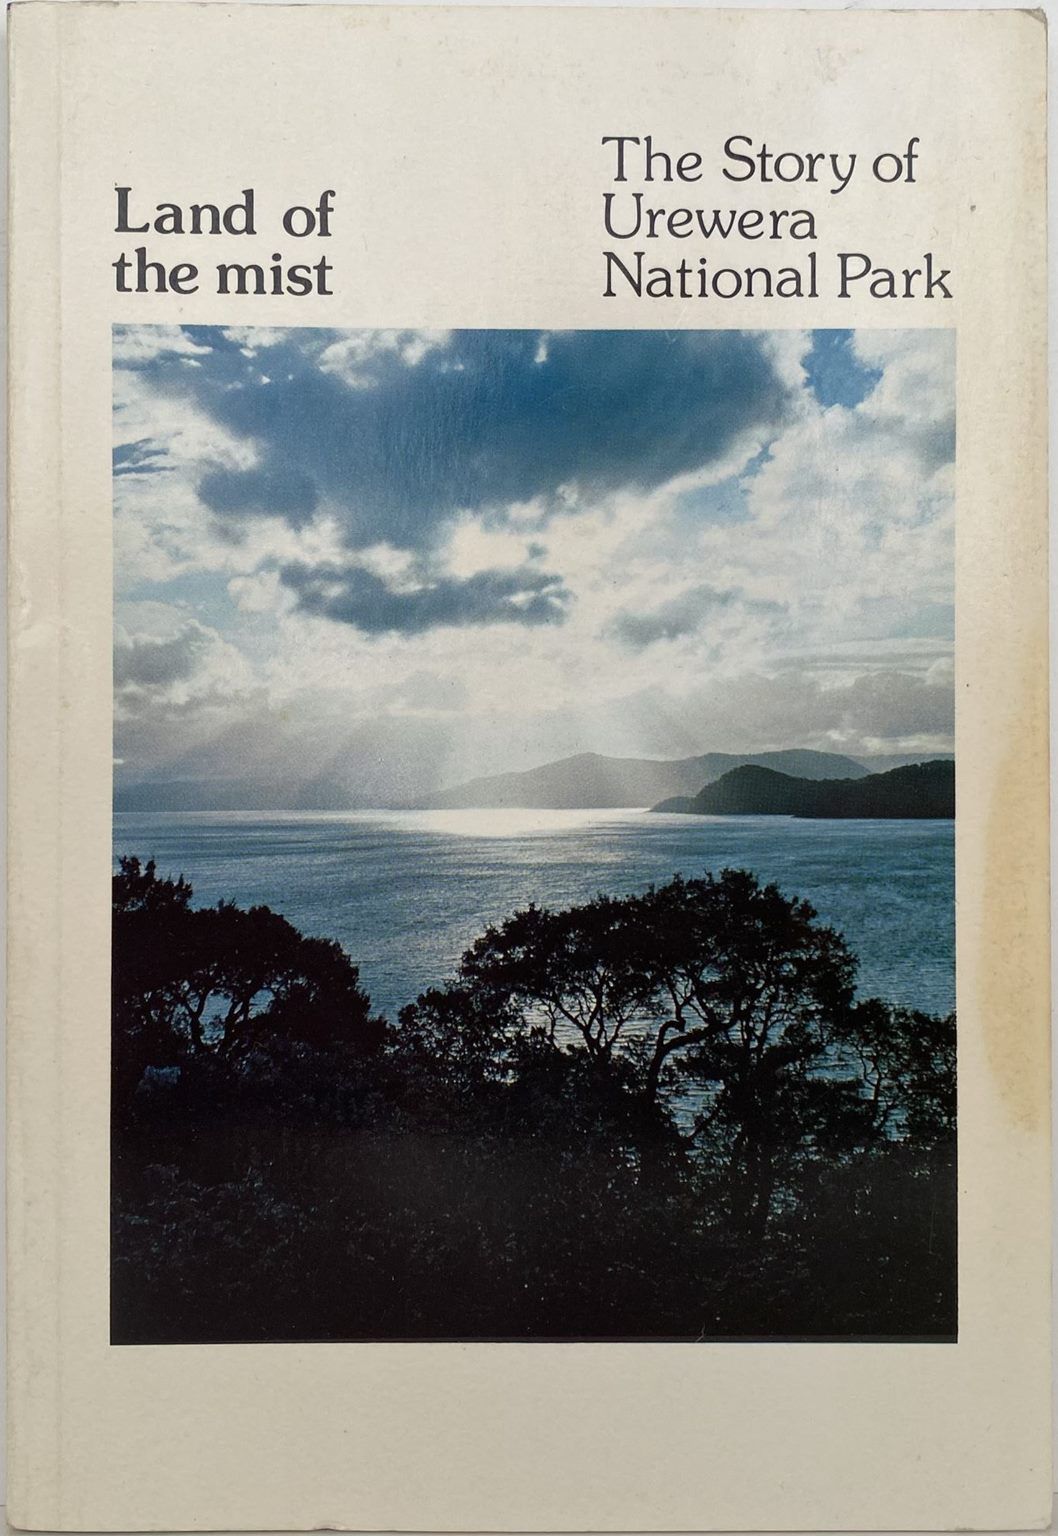 LAND OF THE MIST: The Story of Urewera National Park